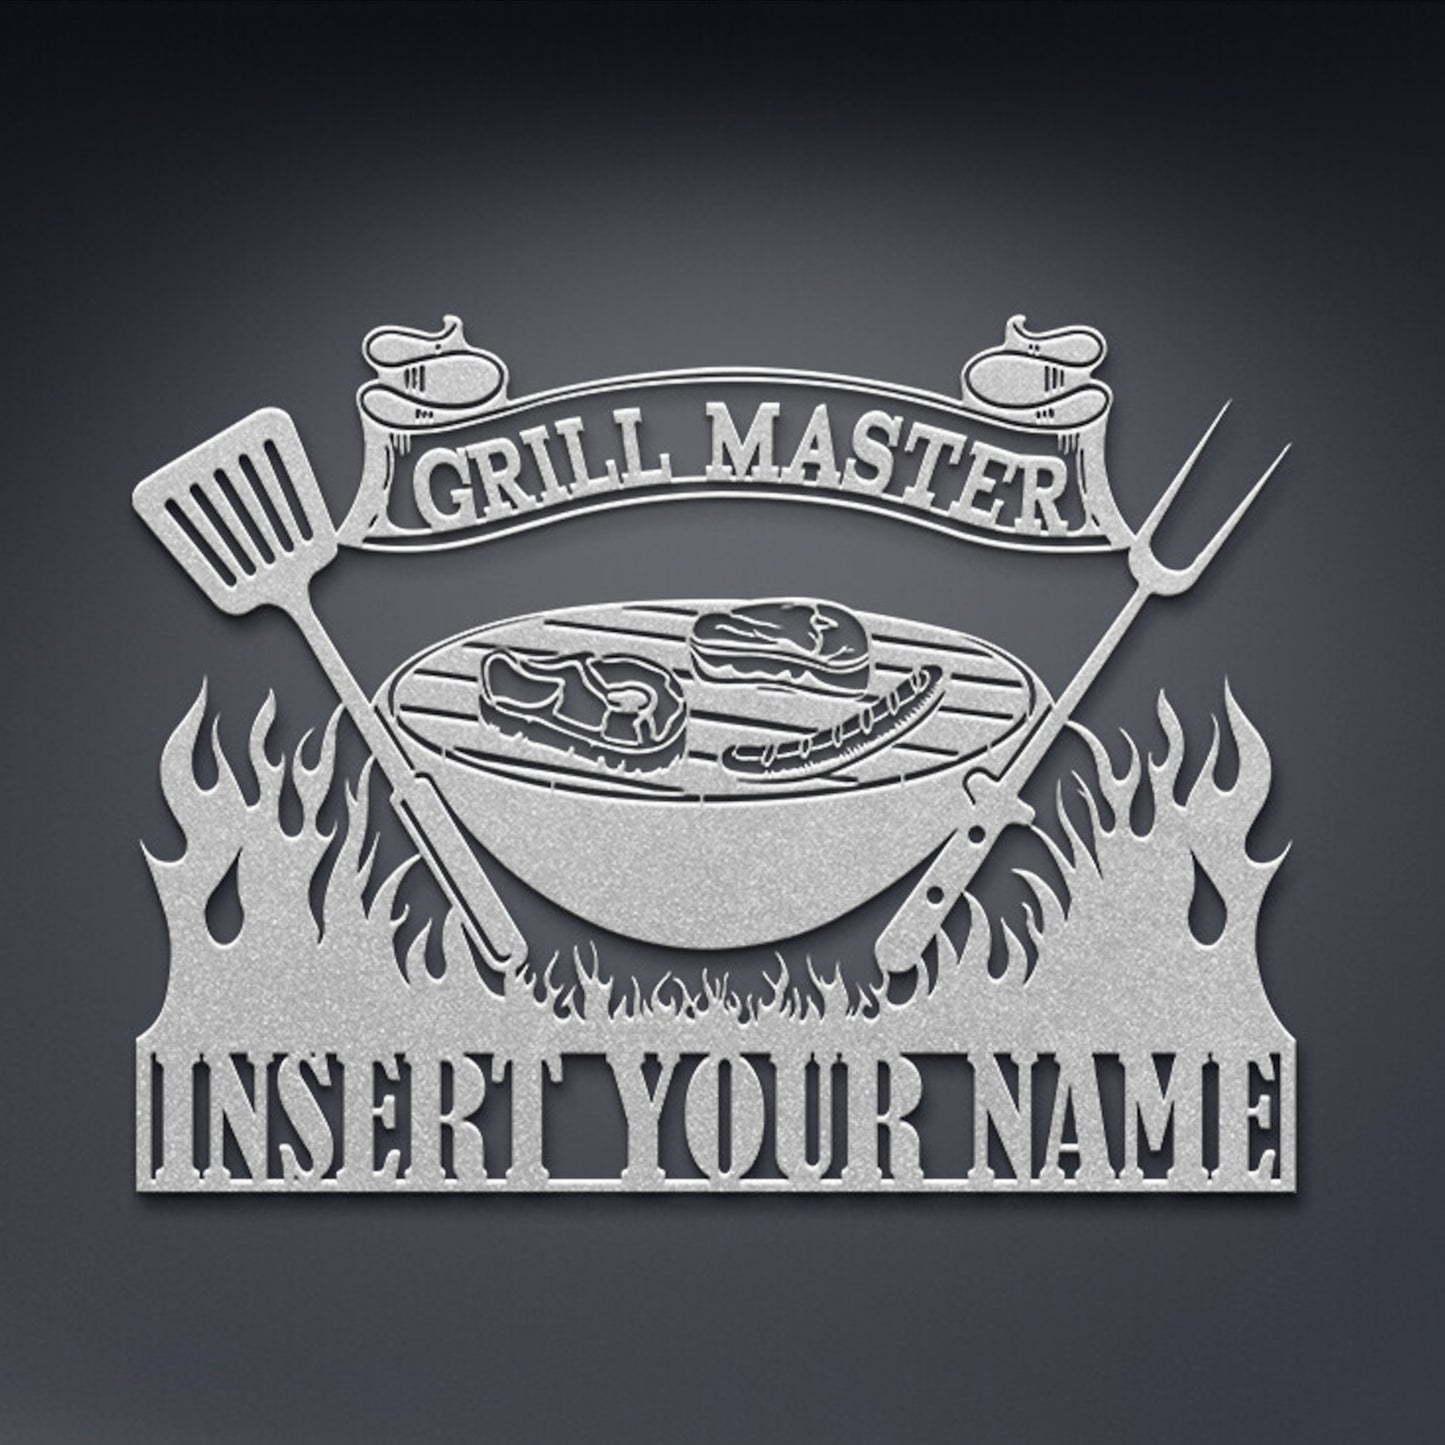 Grill Personalized Name Metal Sign. Custom Grillmaster Steel Sign Monogram Gift. Personal Grill Steel Sign. BBQ Monogram Display For Father